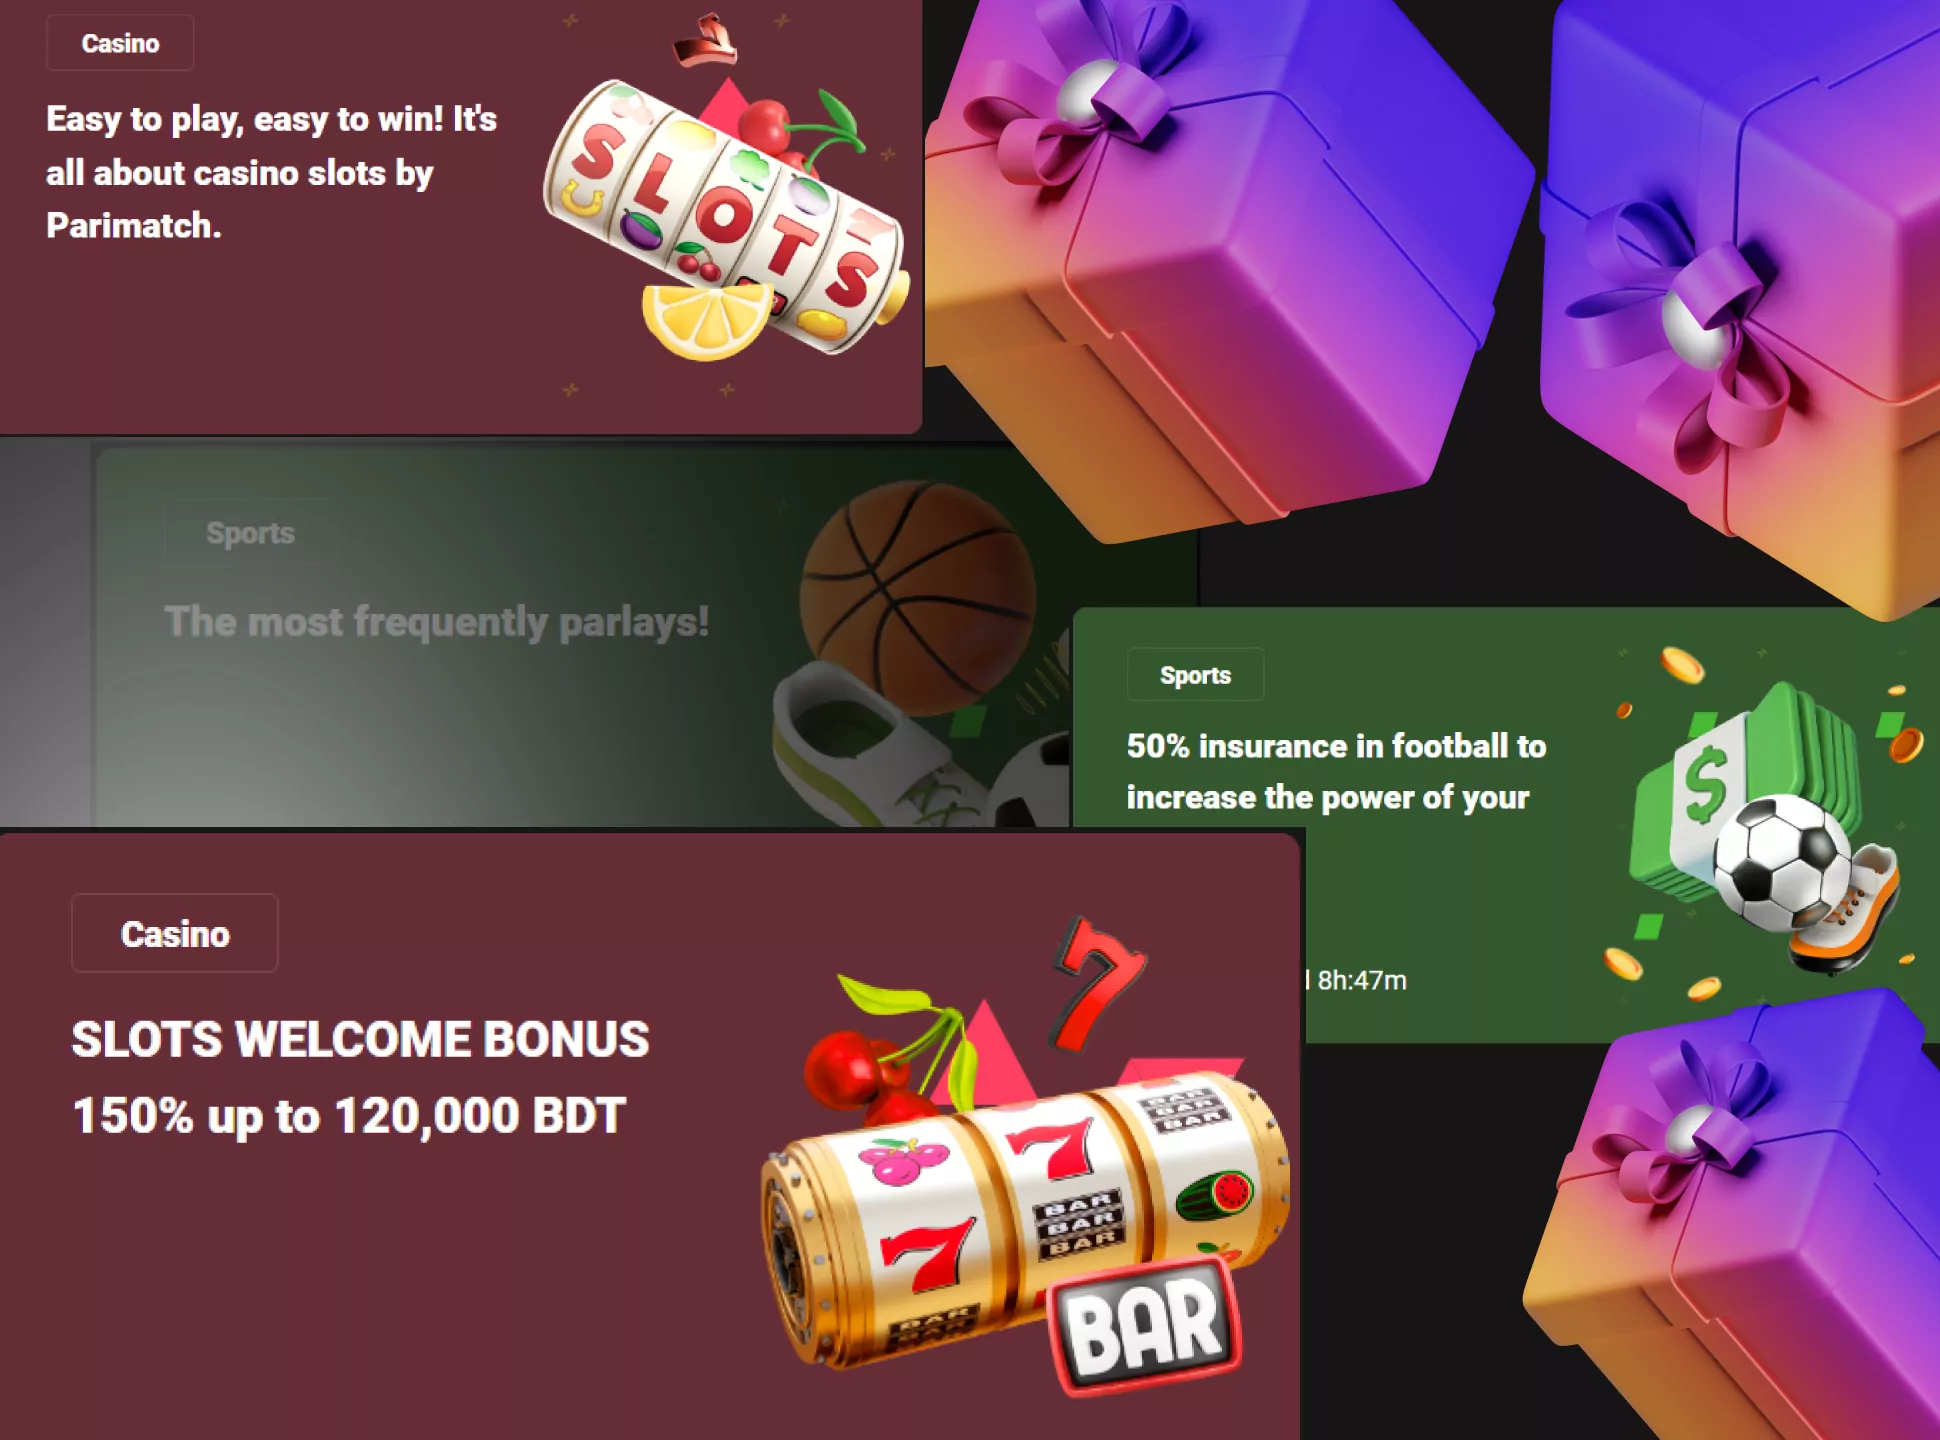 Every online casino has its own bonuse system to attract new players and carry the regular ones.